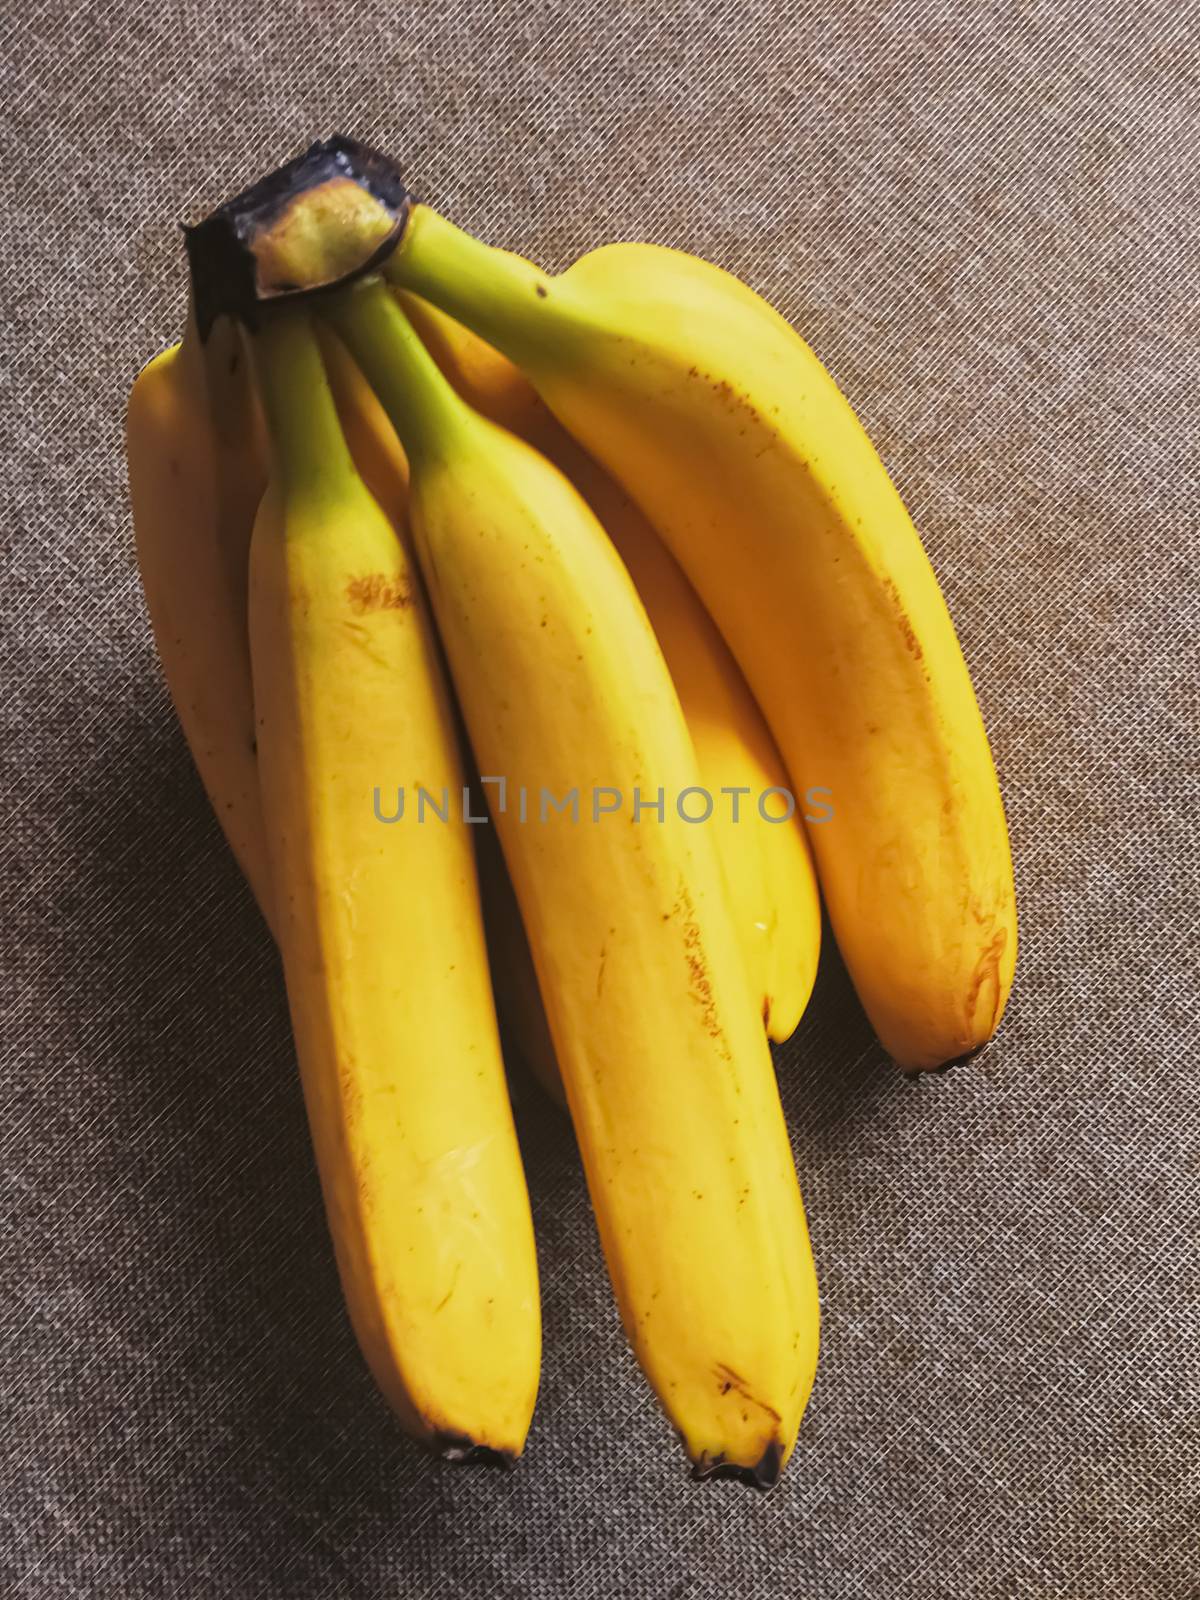 Organic bananas on rustic linen background, fruits farming and agriculture